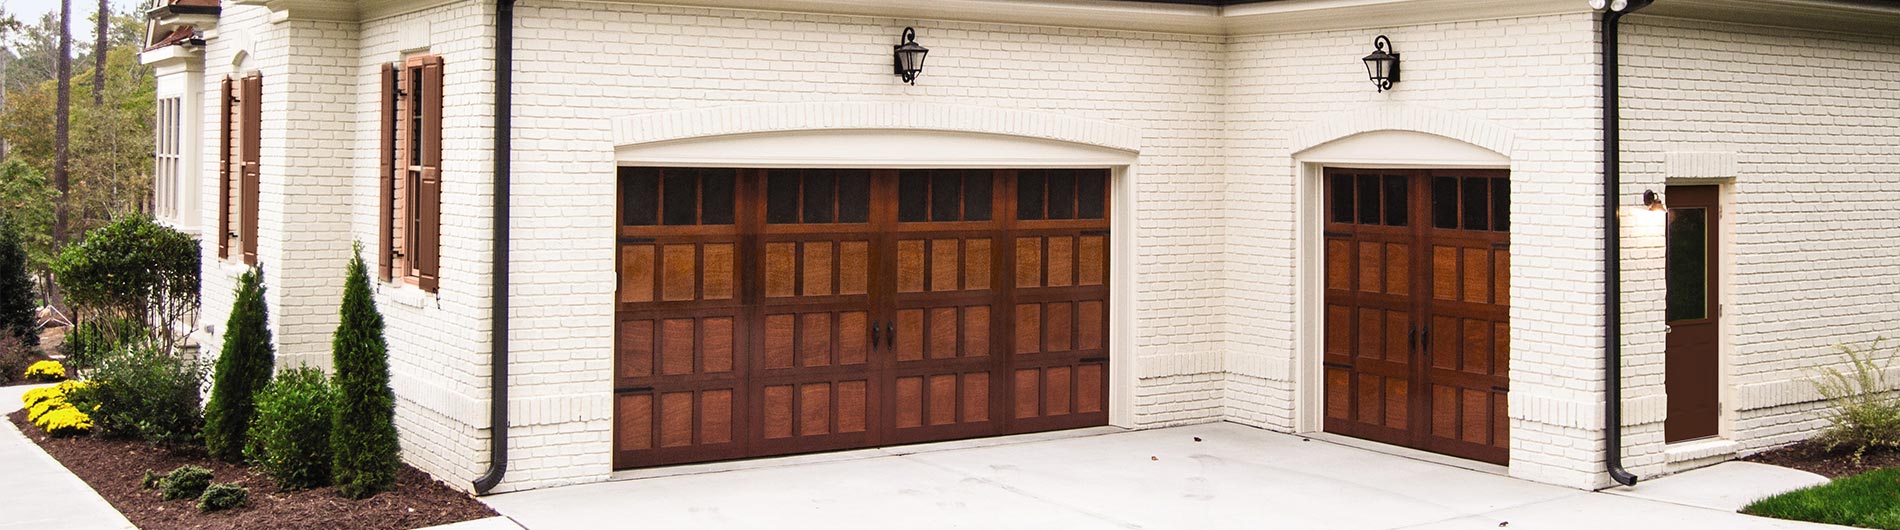 two town wooden carriage style garage doors